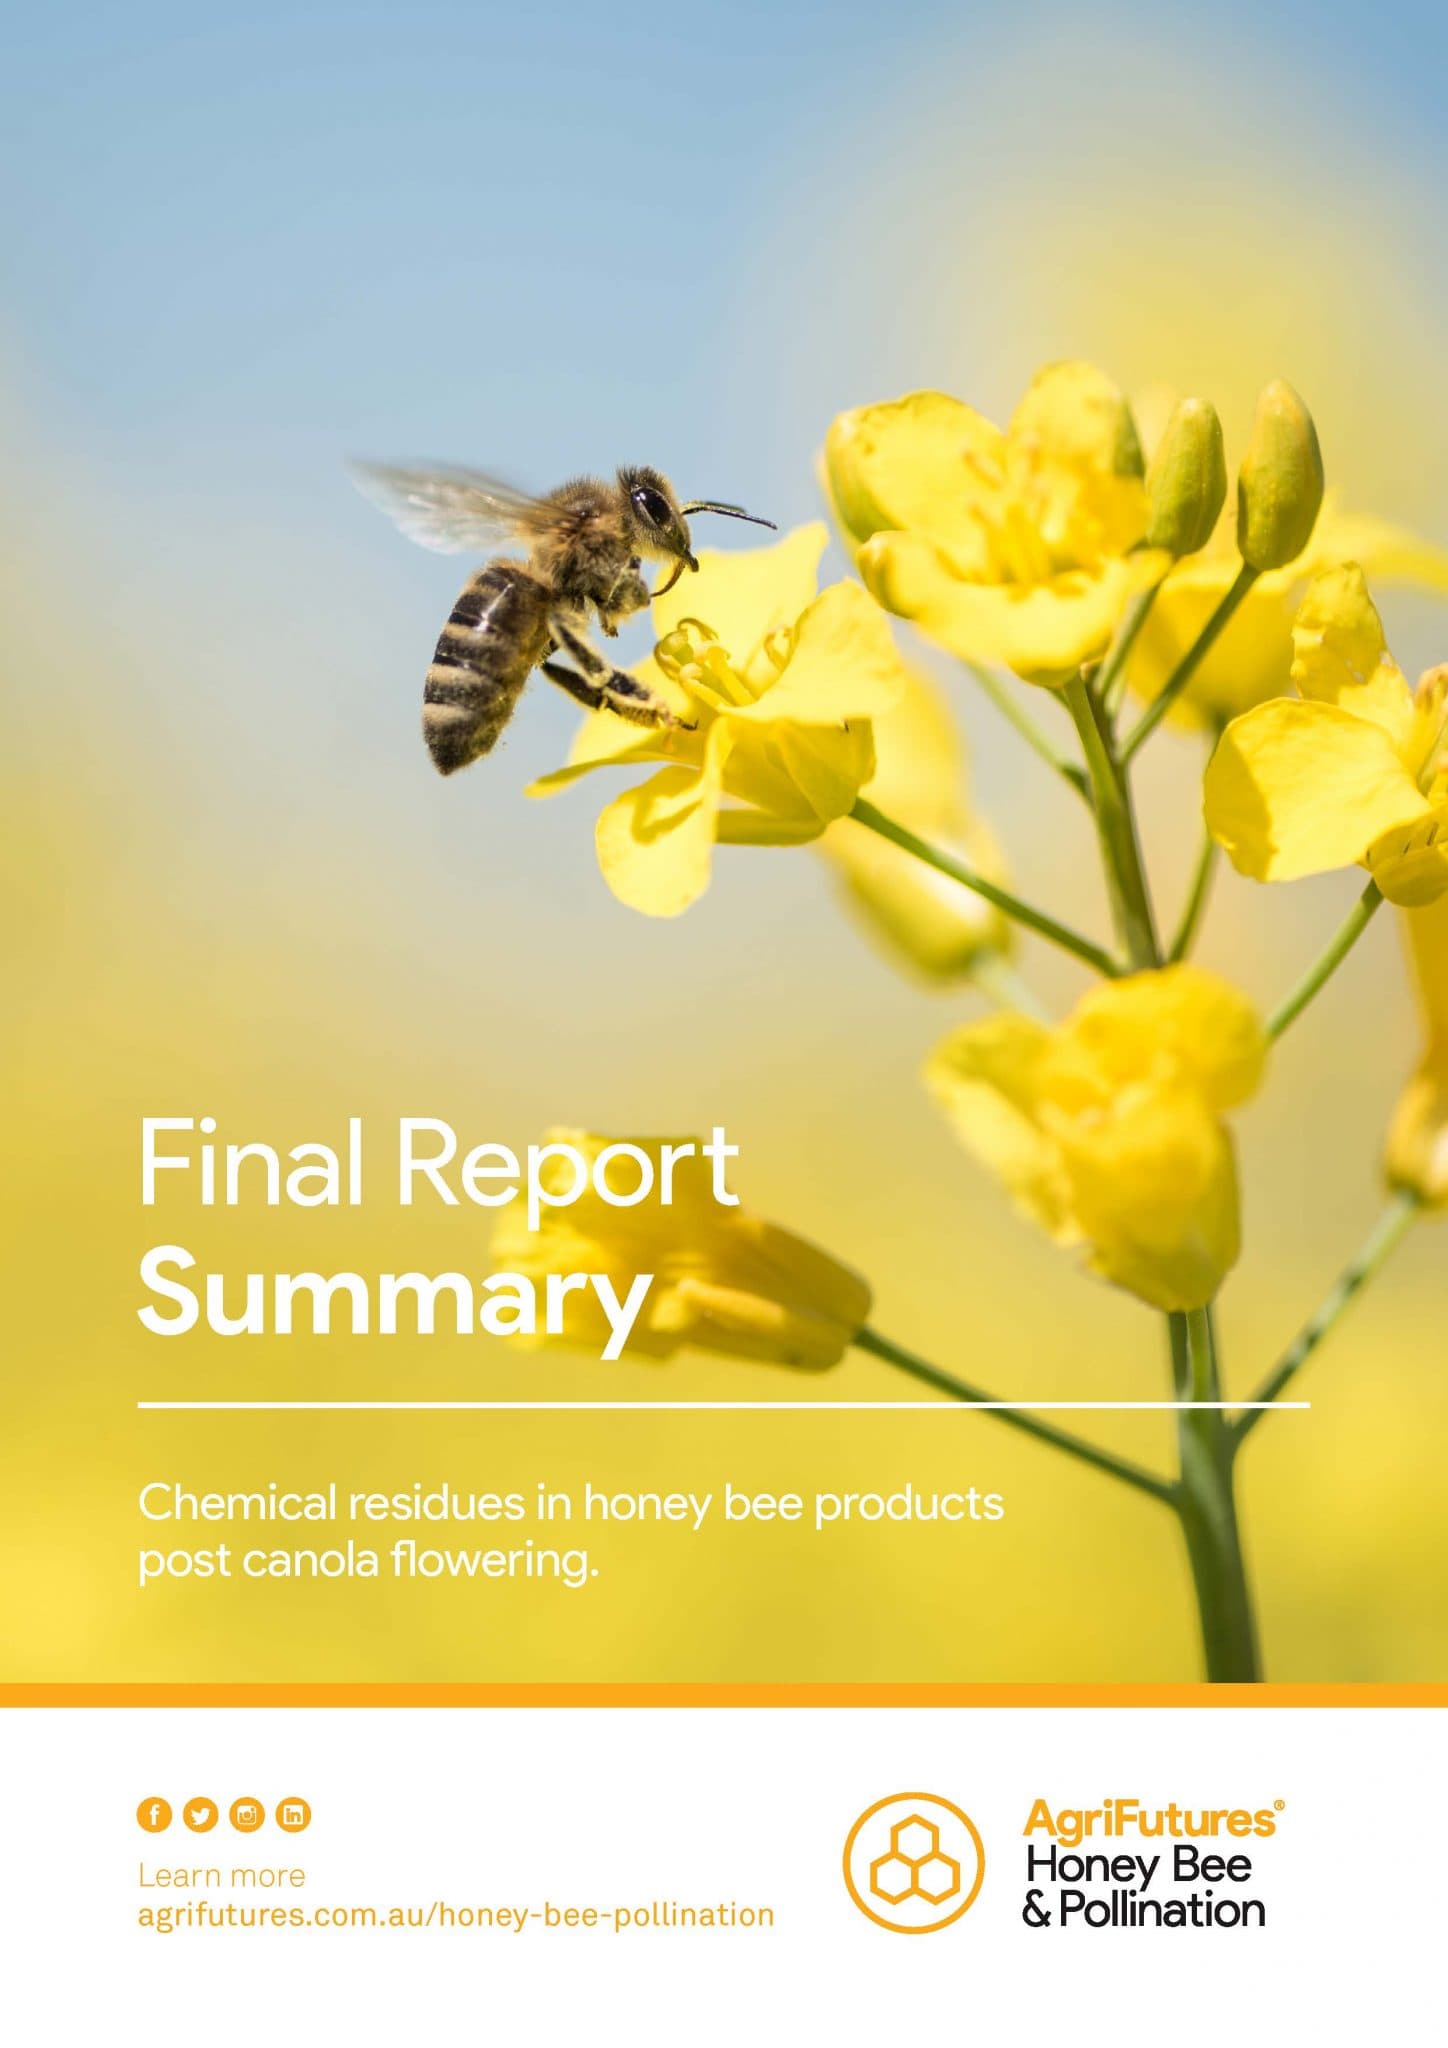 Final report summary: Chemical residues in honey bee products post canola flowering - image